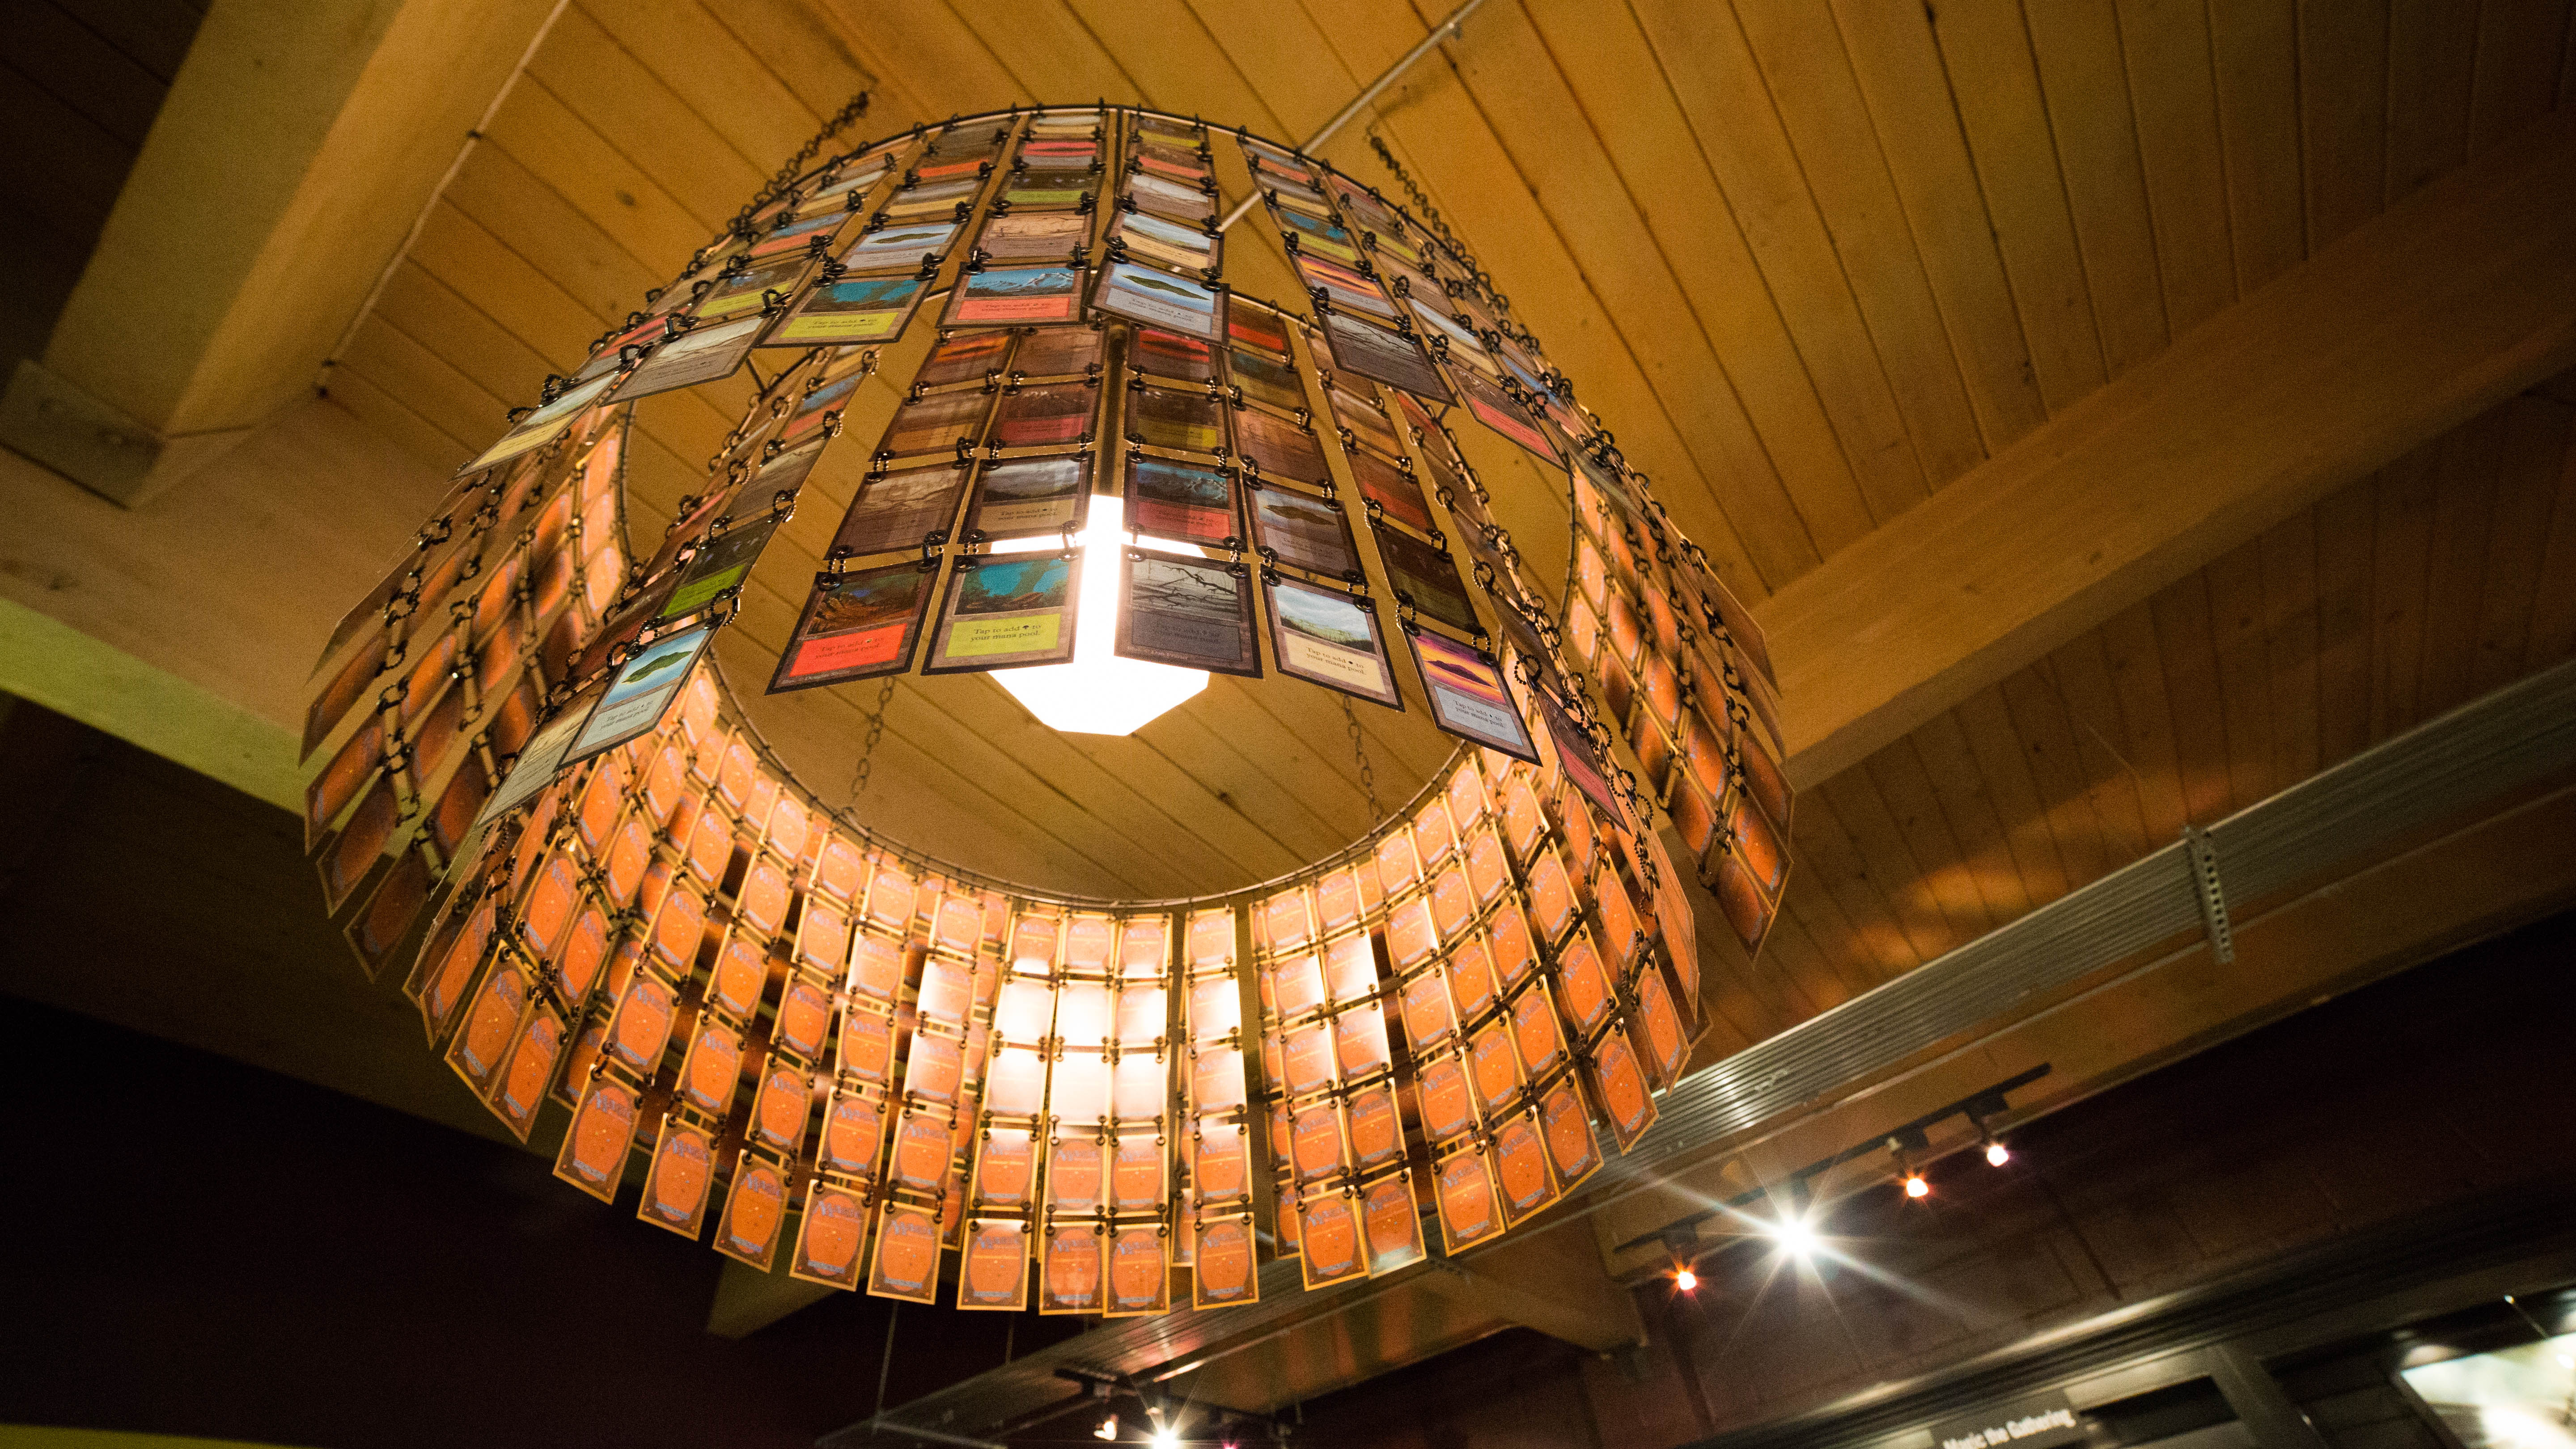 image of chandelier made of Magic cards taken from below